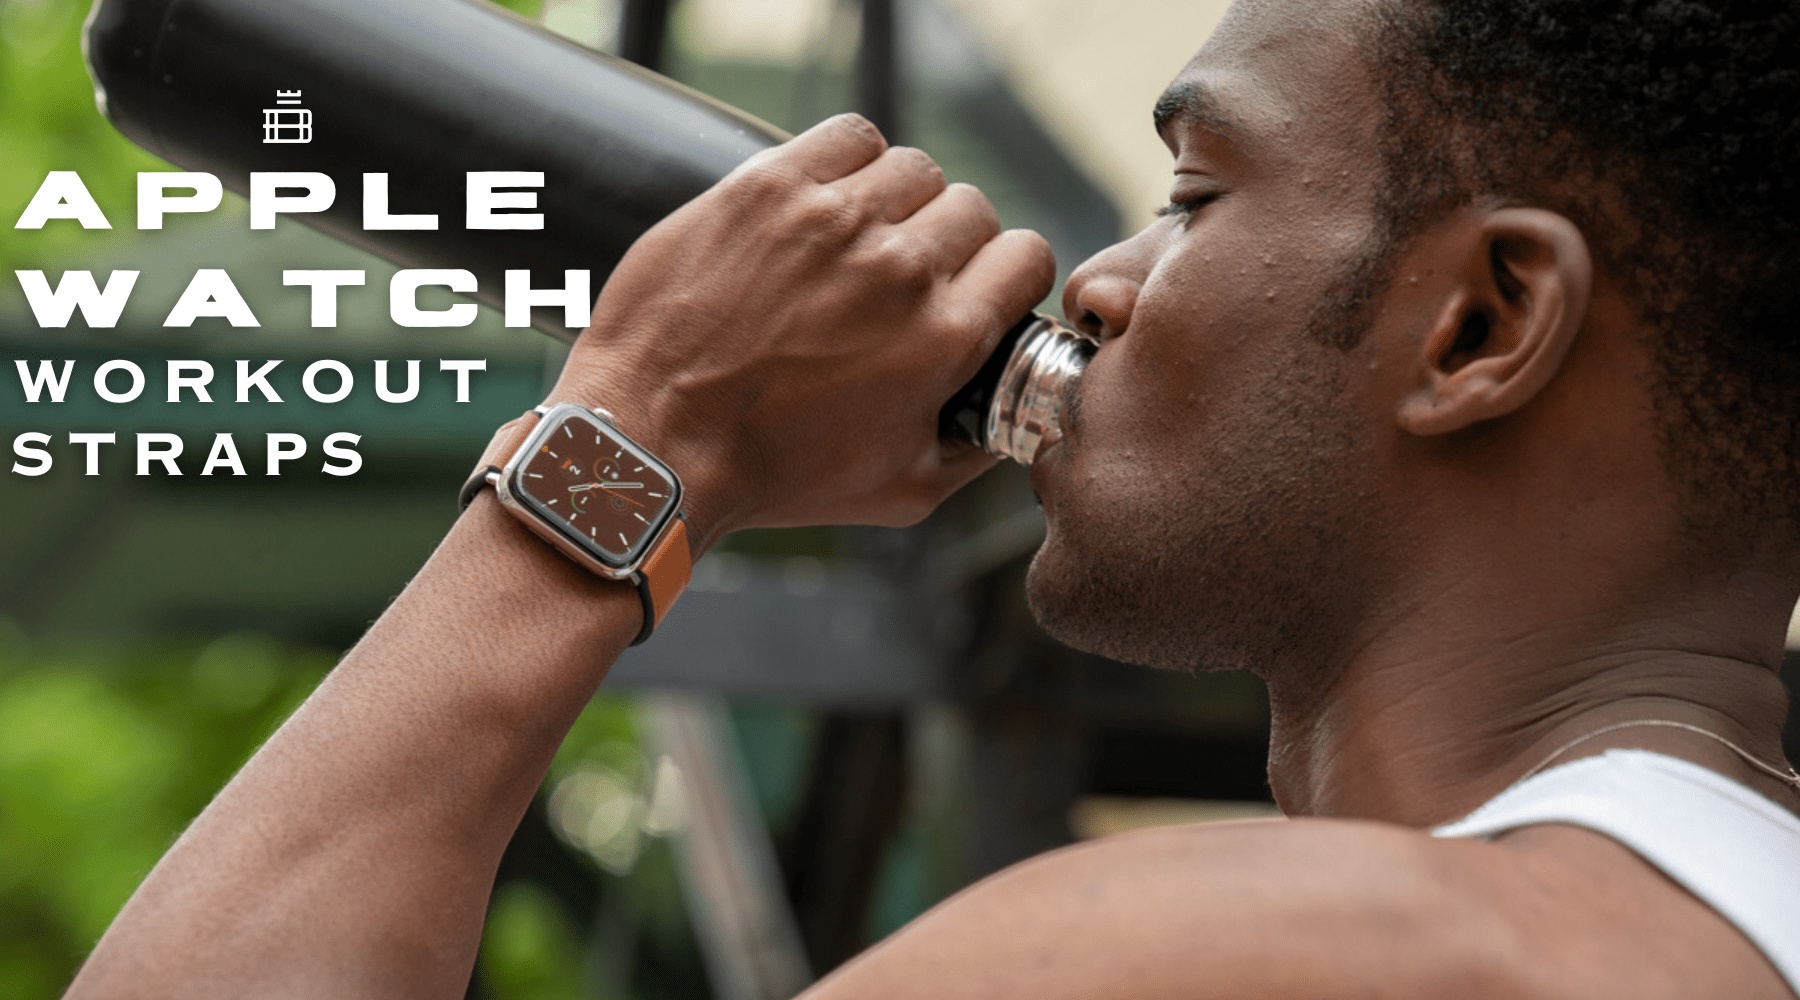 Shopping for a workout band for your Apple Watch? Read this first! - Buckle and Band